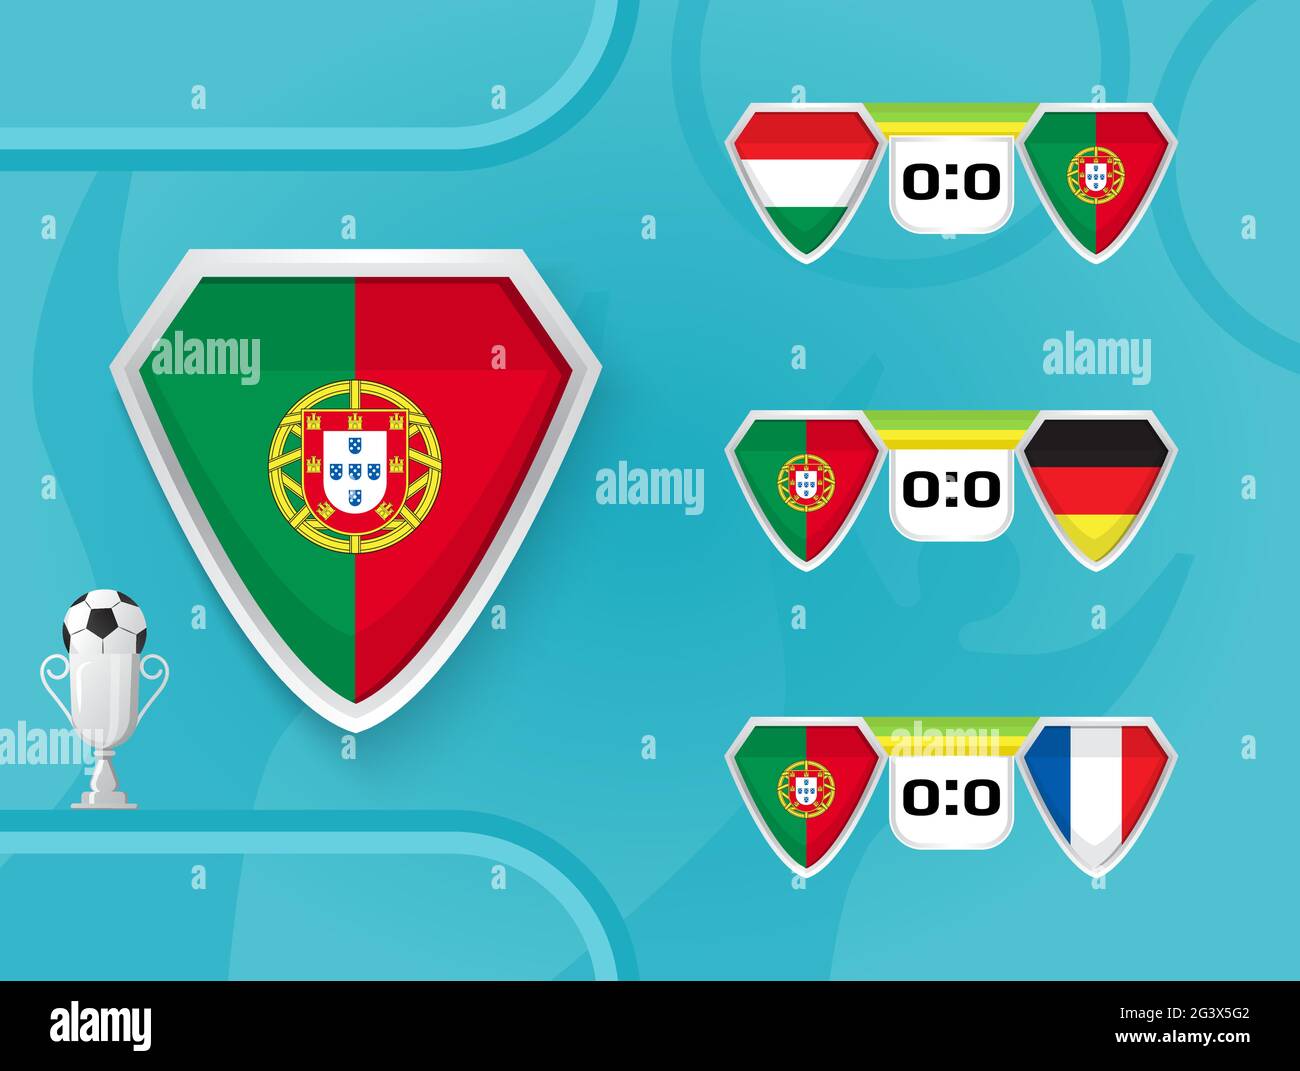 Schedule of national football team of Portugal matches in the European Championship 2020. Shields with the flag of Hungary, Portugal, France, Germany. Stock Vector